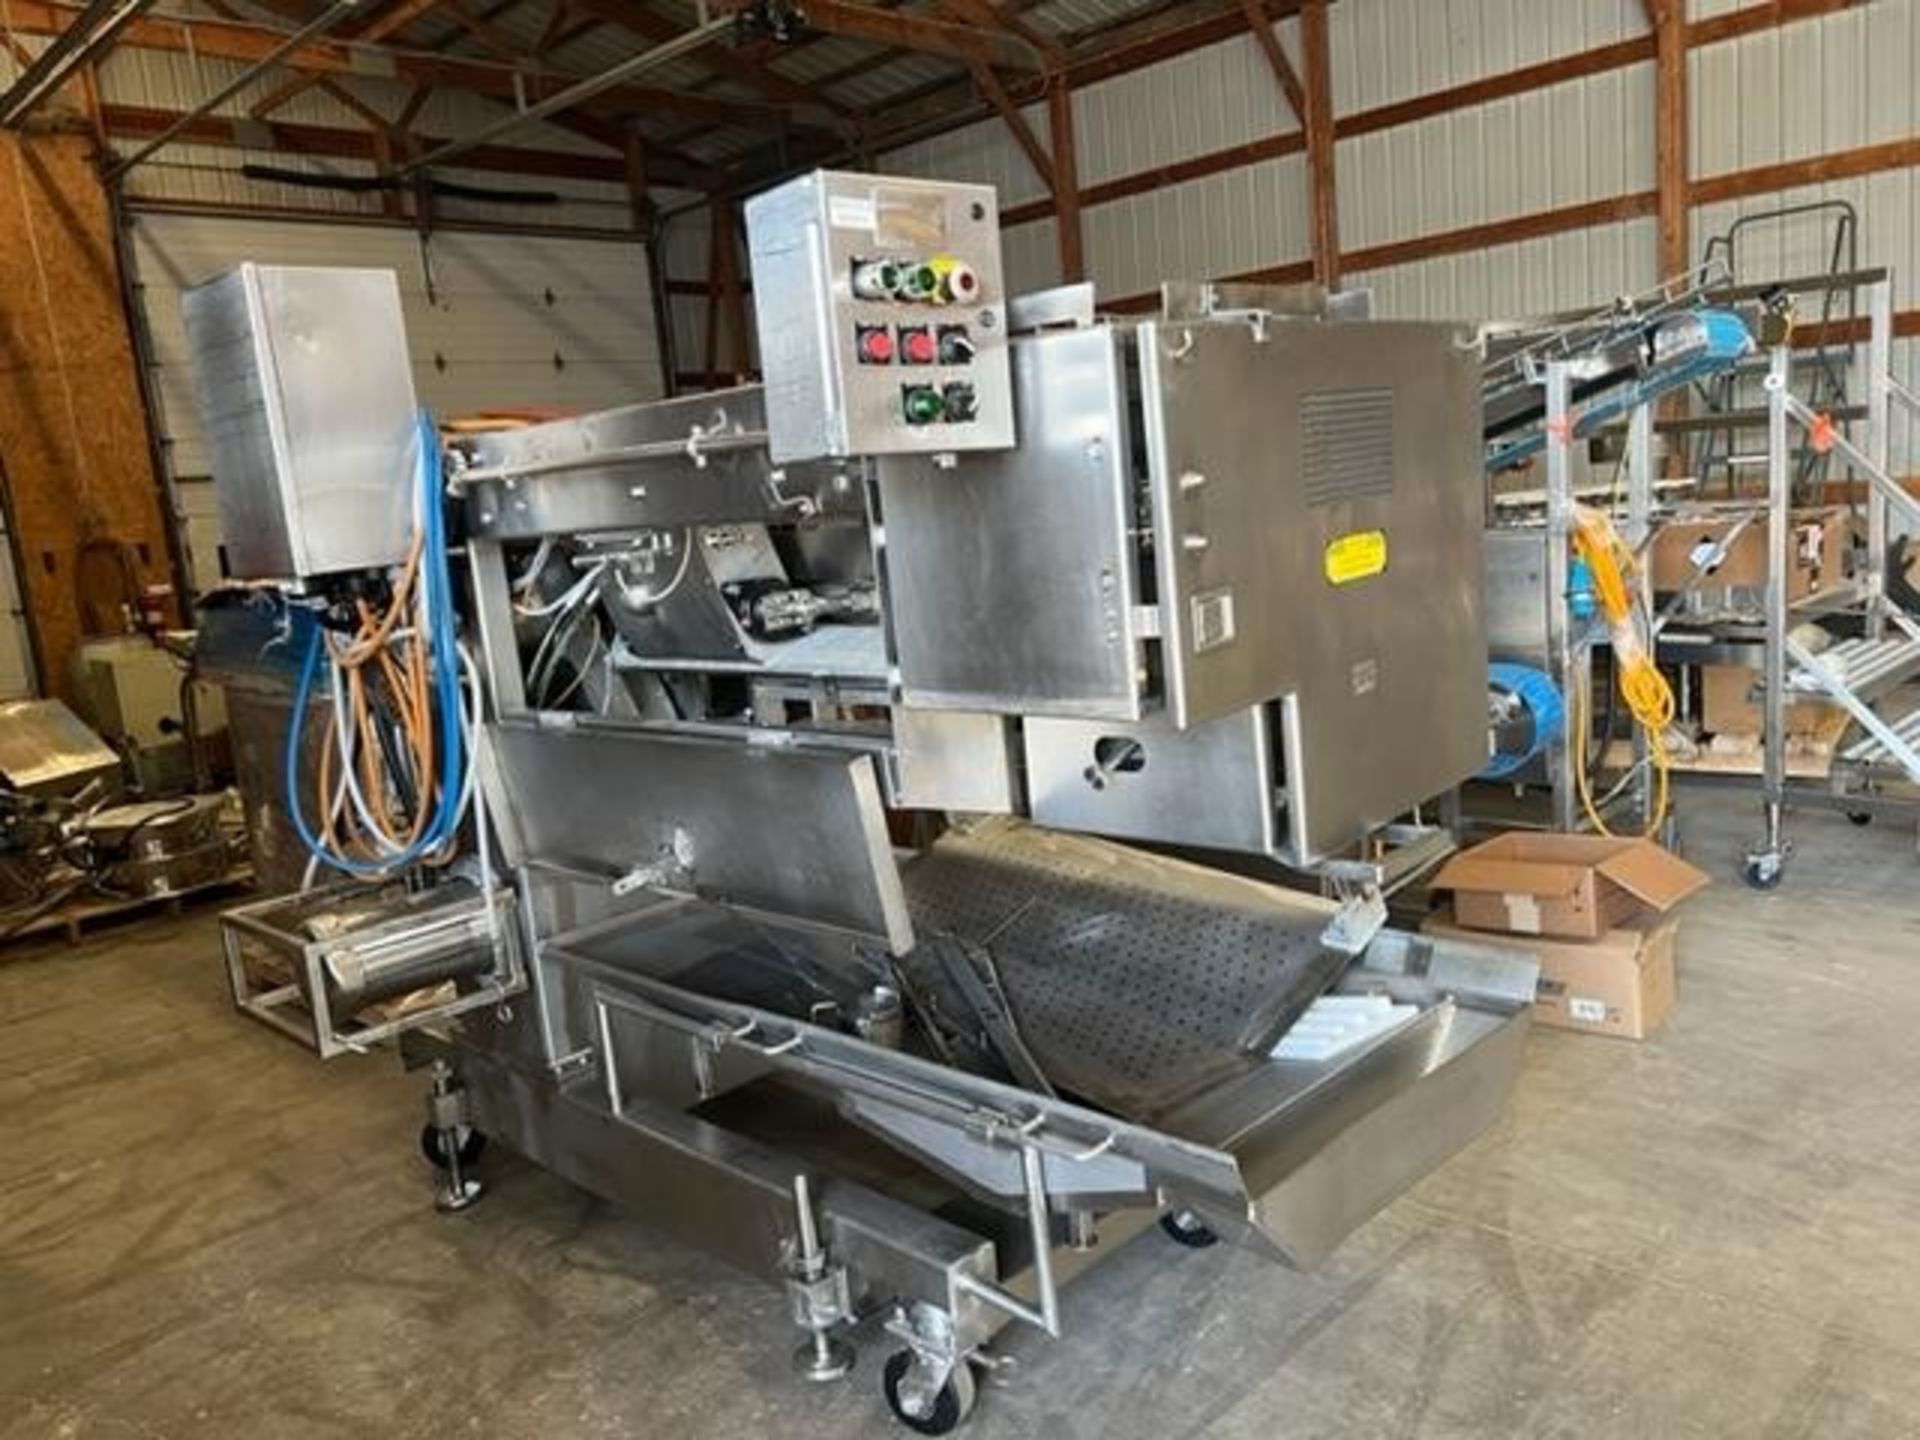 Grote S/S Sanitary Slicer/Applicator, Model S/A, We have Many Different Sizes of Tooling for this - Image 9 of 15